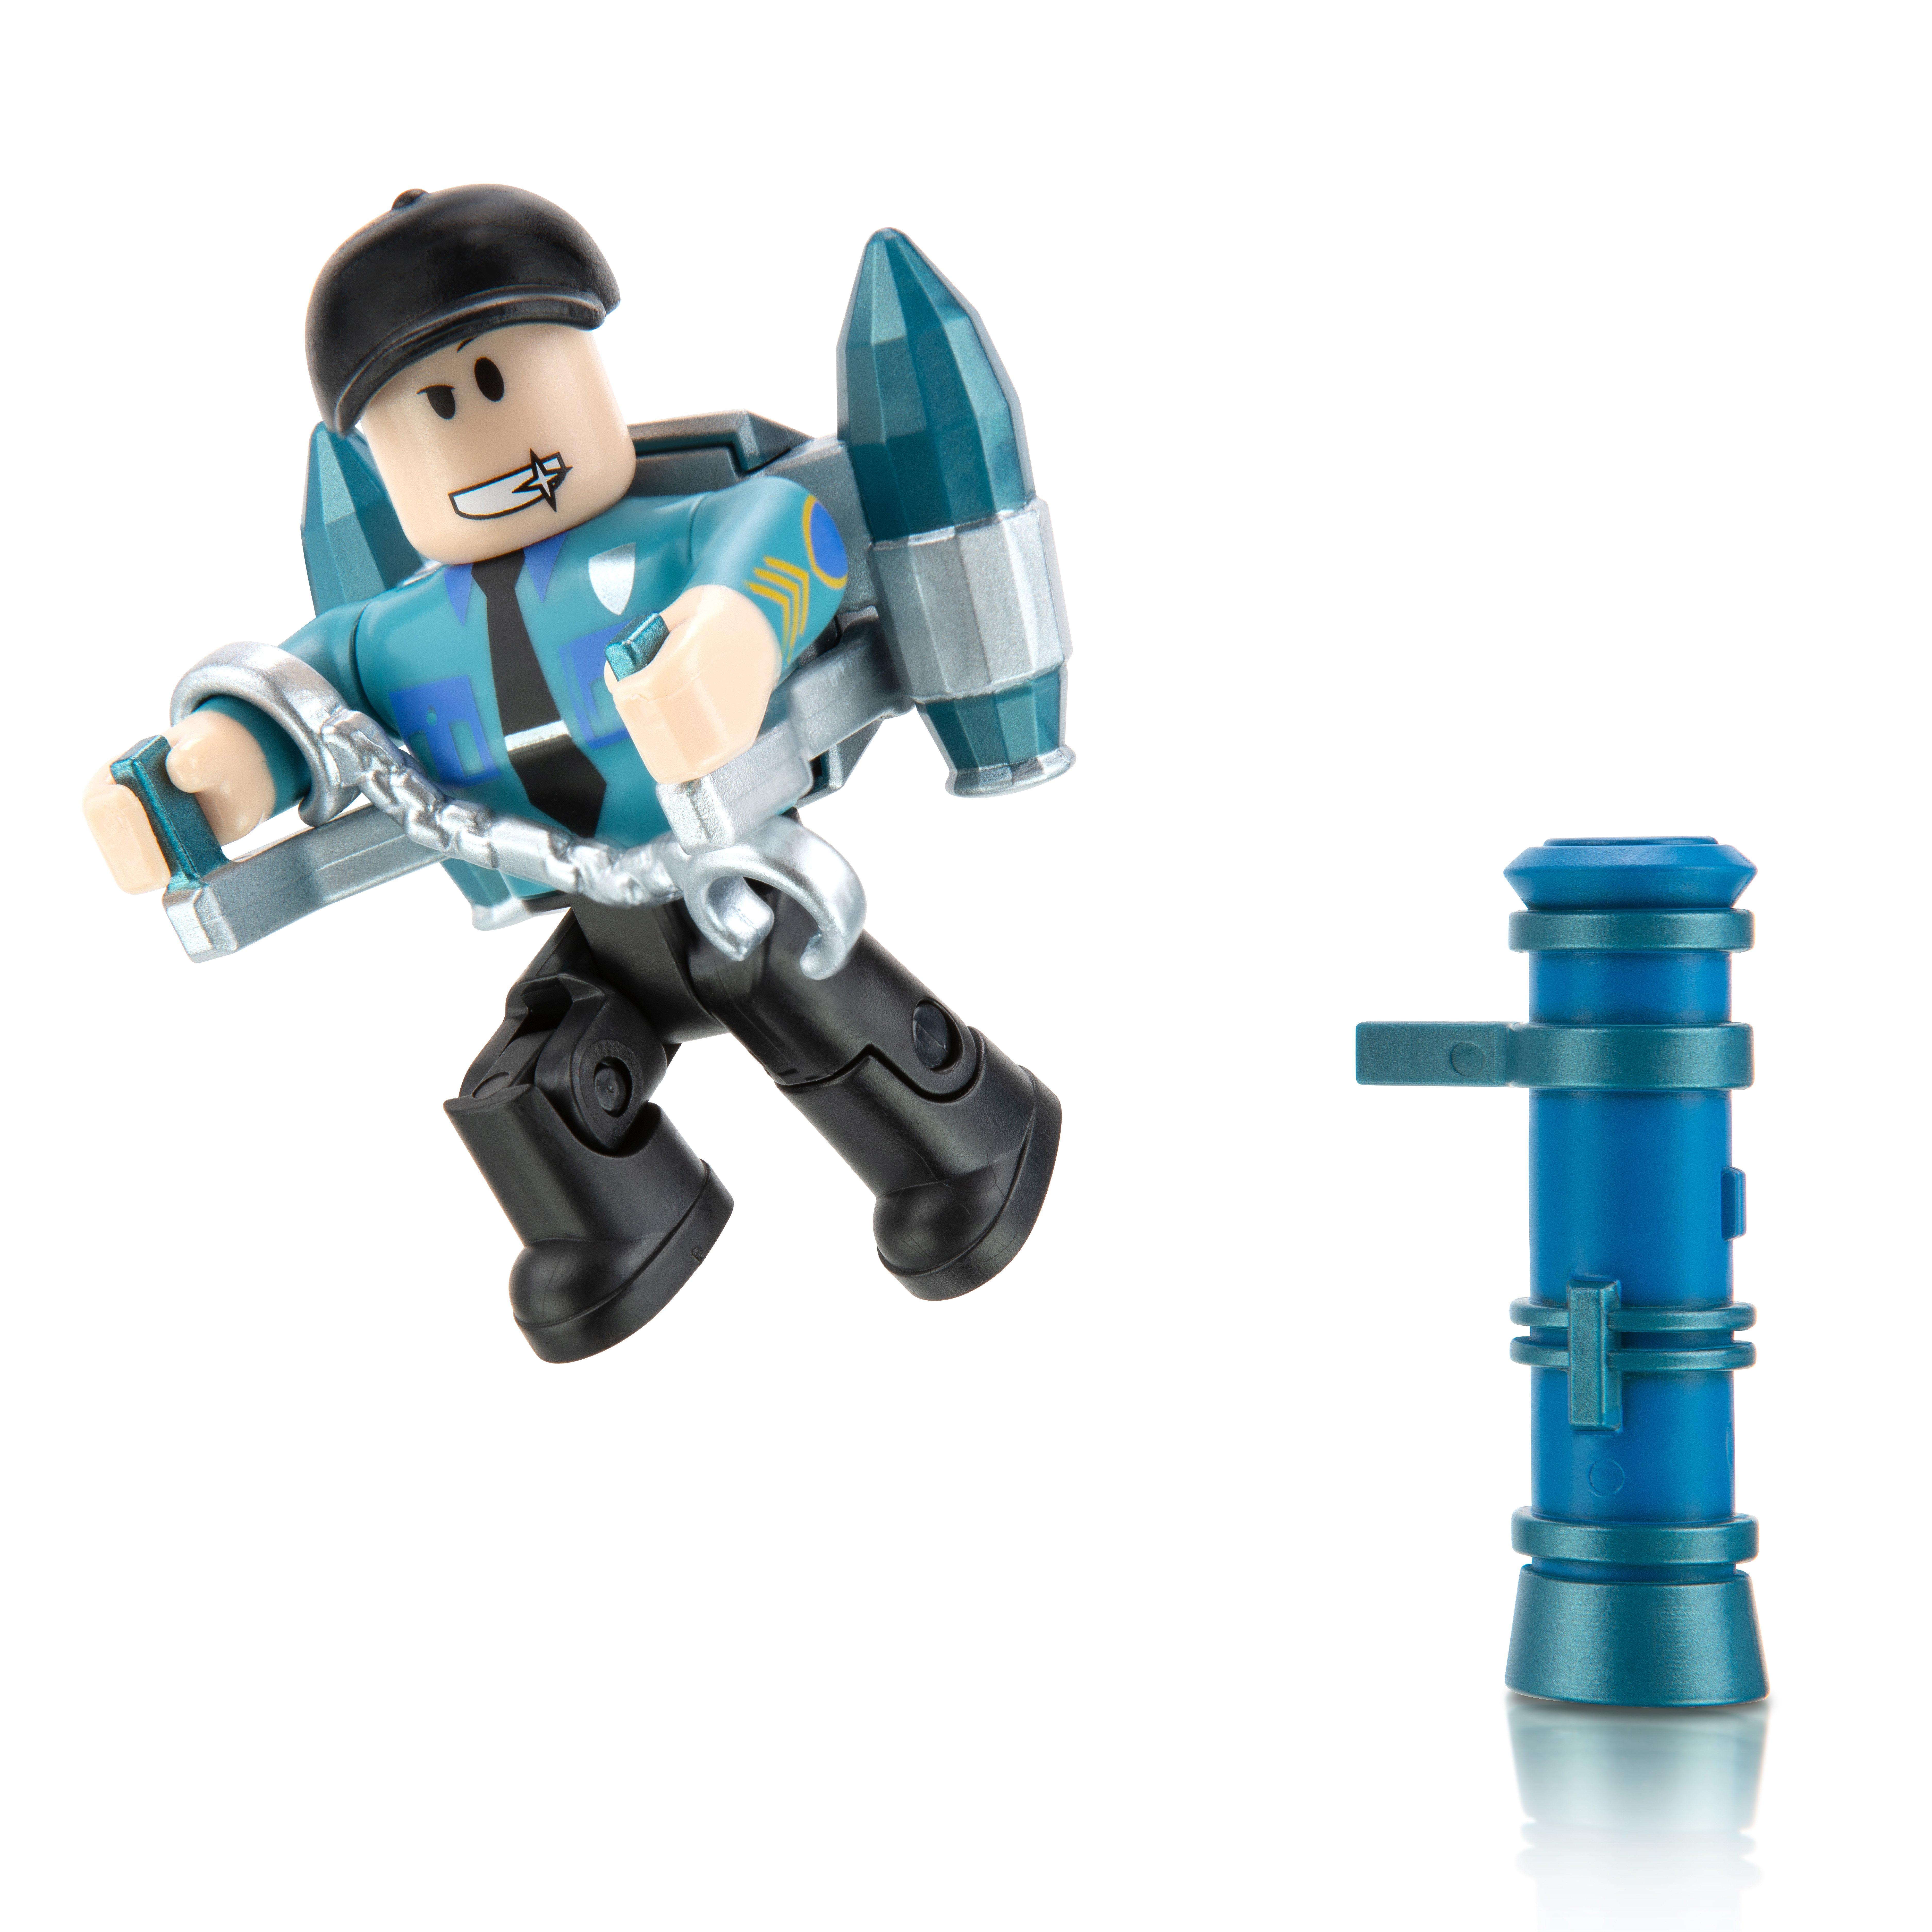 Roblox Action Collection Single Figure Pack Includes 1 Exclusive Virtual Item Styles May Vary Gamestop - gamestop roblox card 25